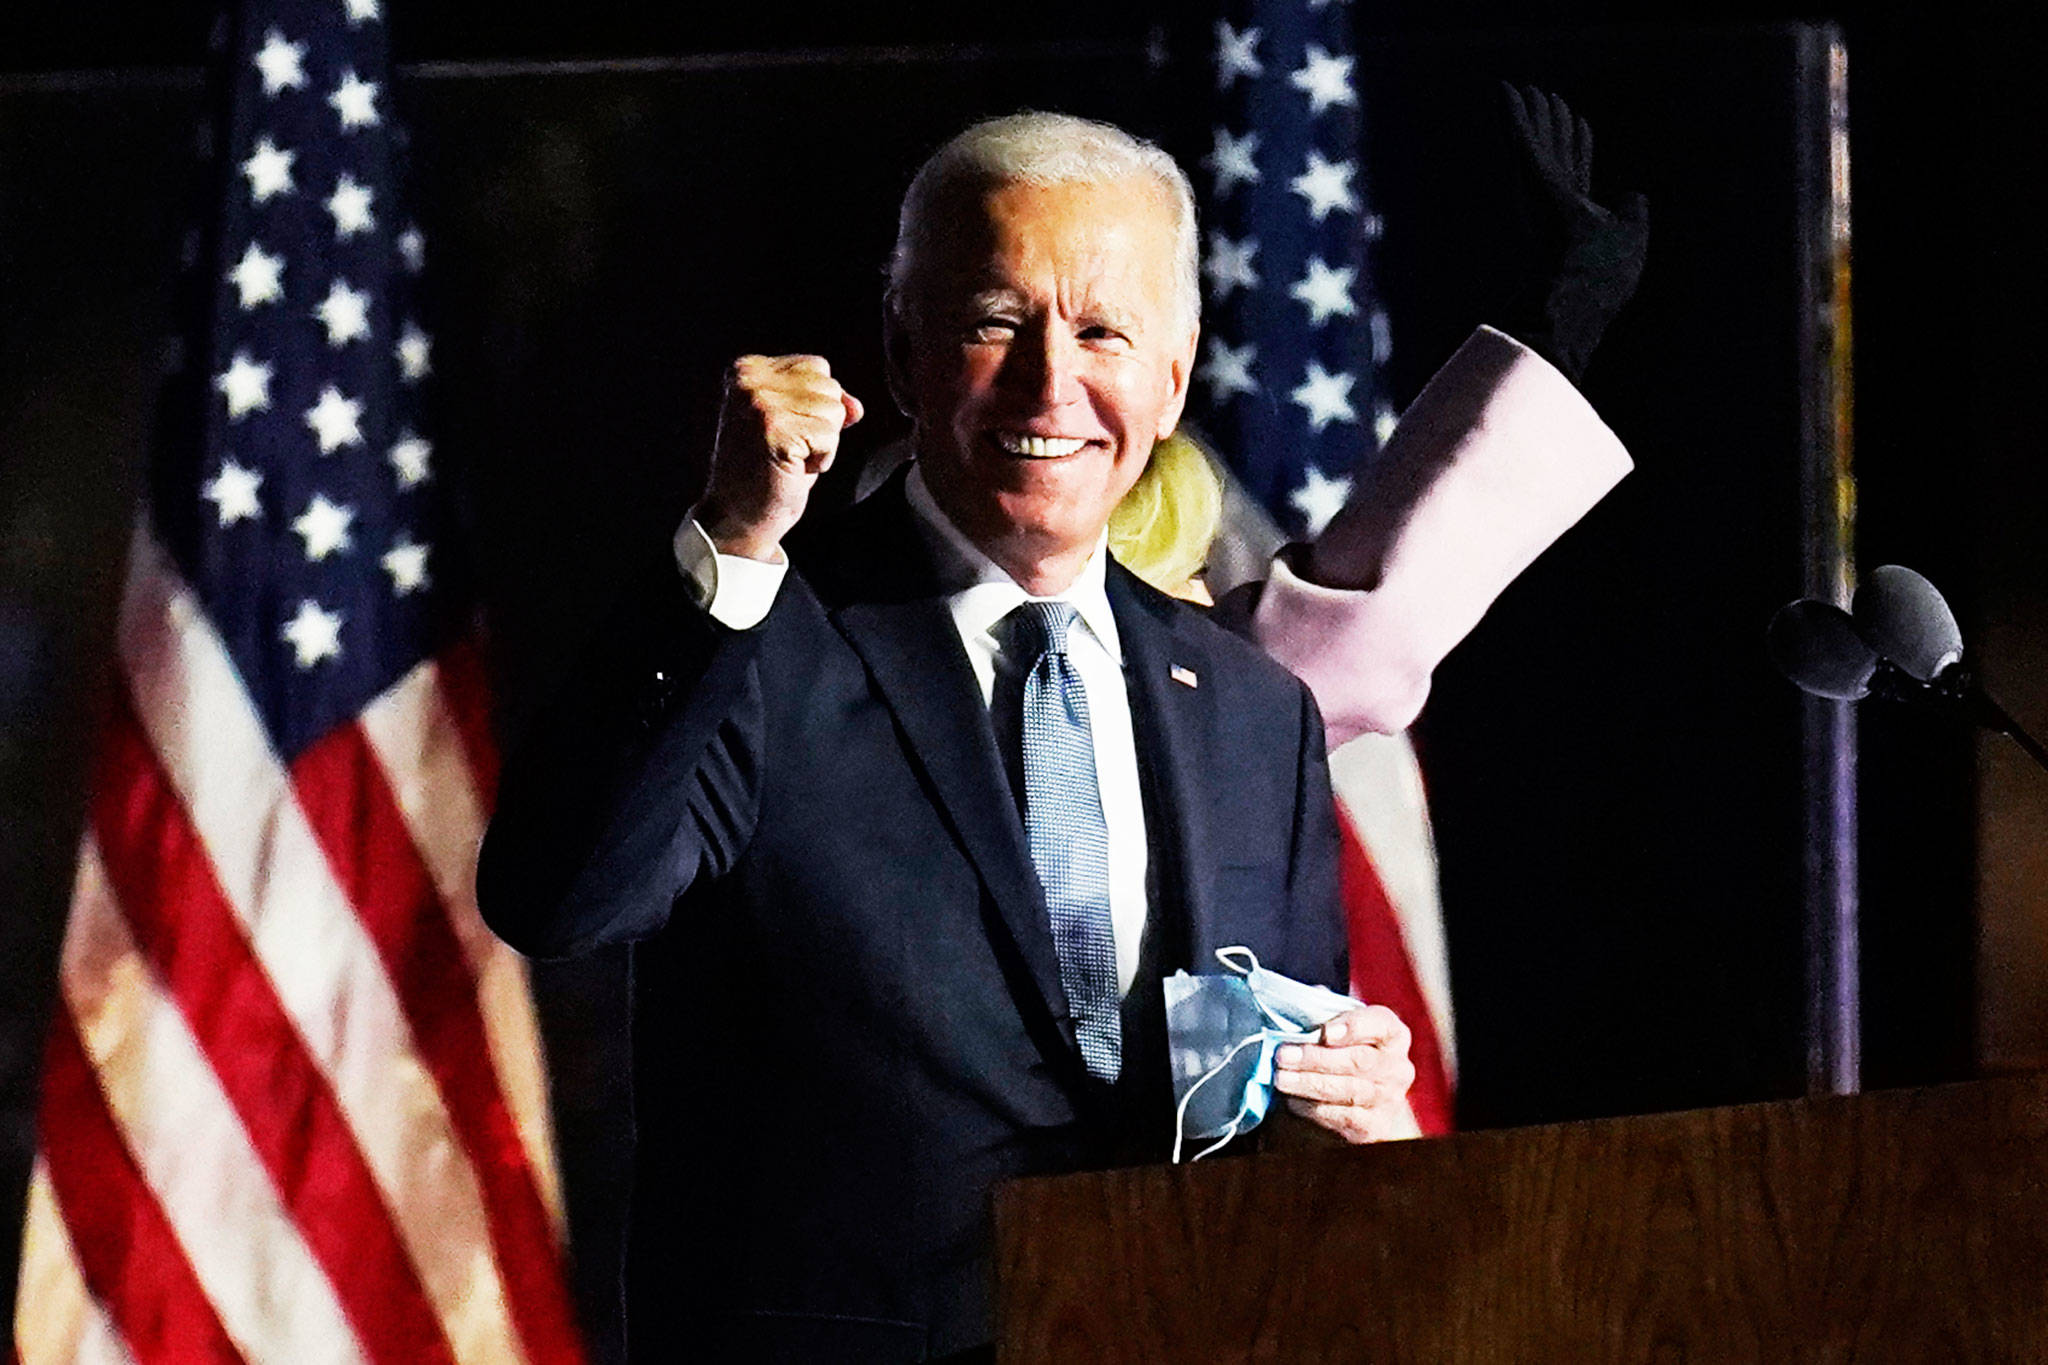 Joe Biden speaks to supporters on Nov. 4, 2020, in Wilmington, Del. Biden defeated President Donald Trump to become the 46th president of the United States on Saturday. (AP Photo/Paul Sancya)